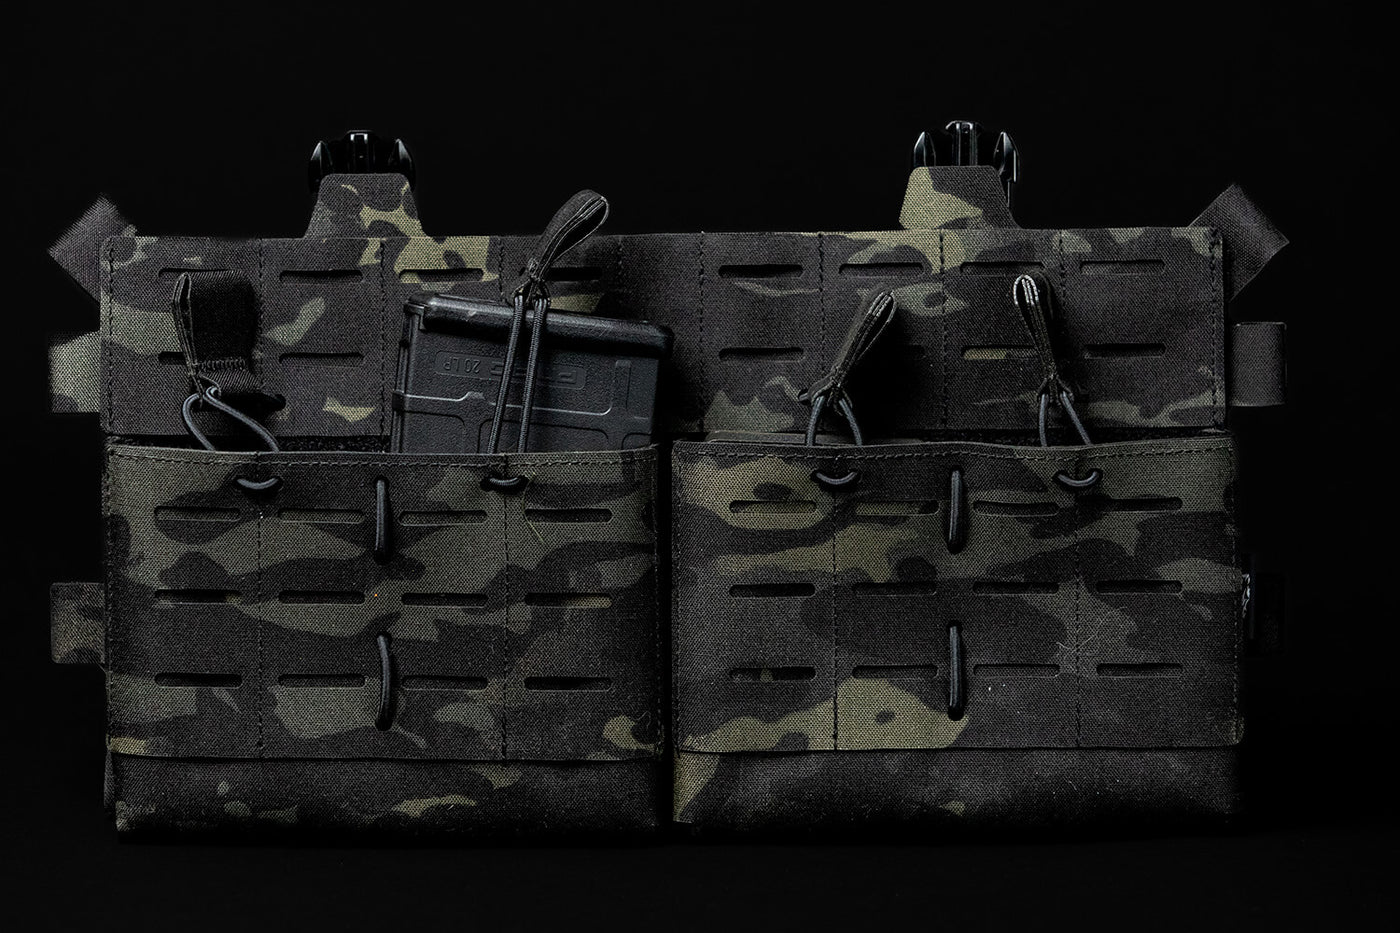 PMC Chest Rig